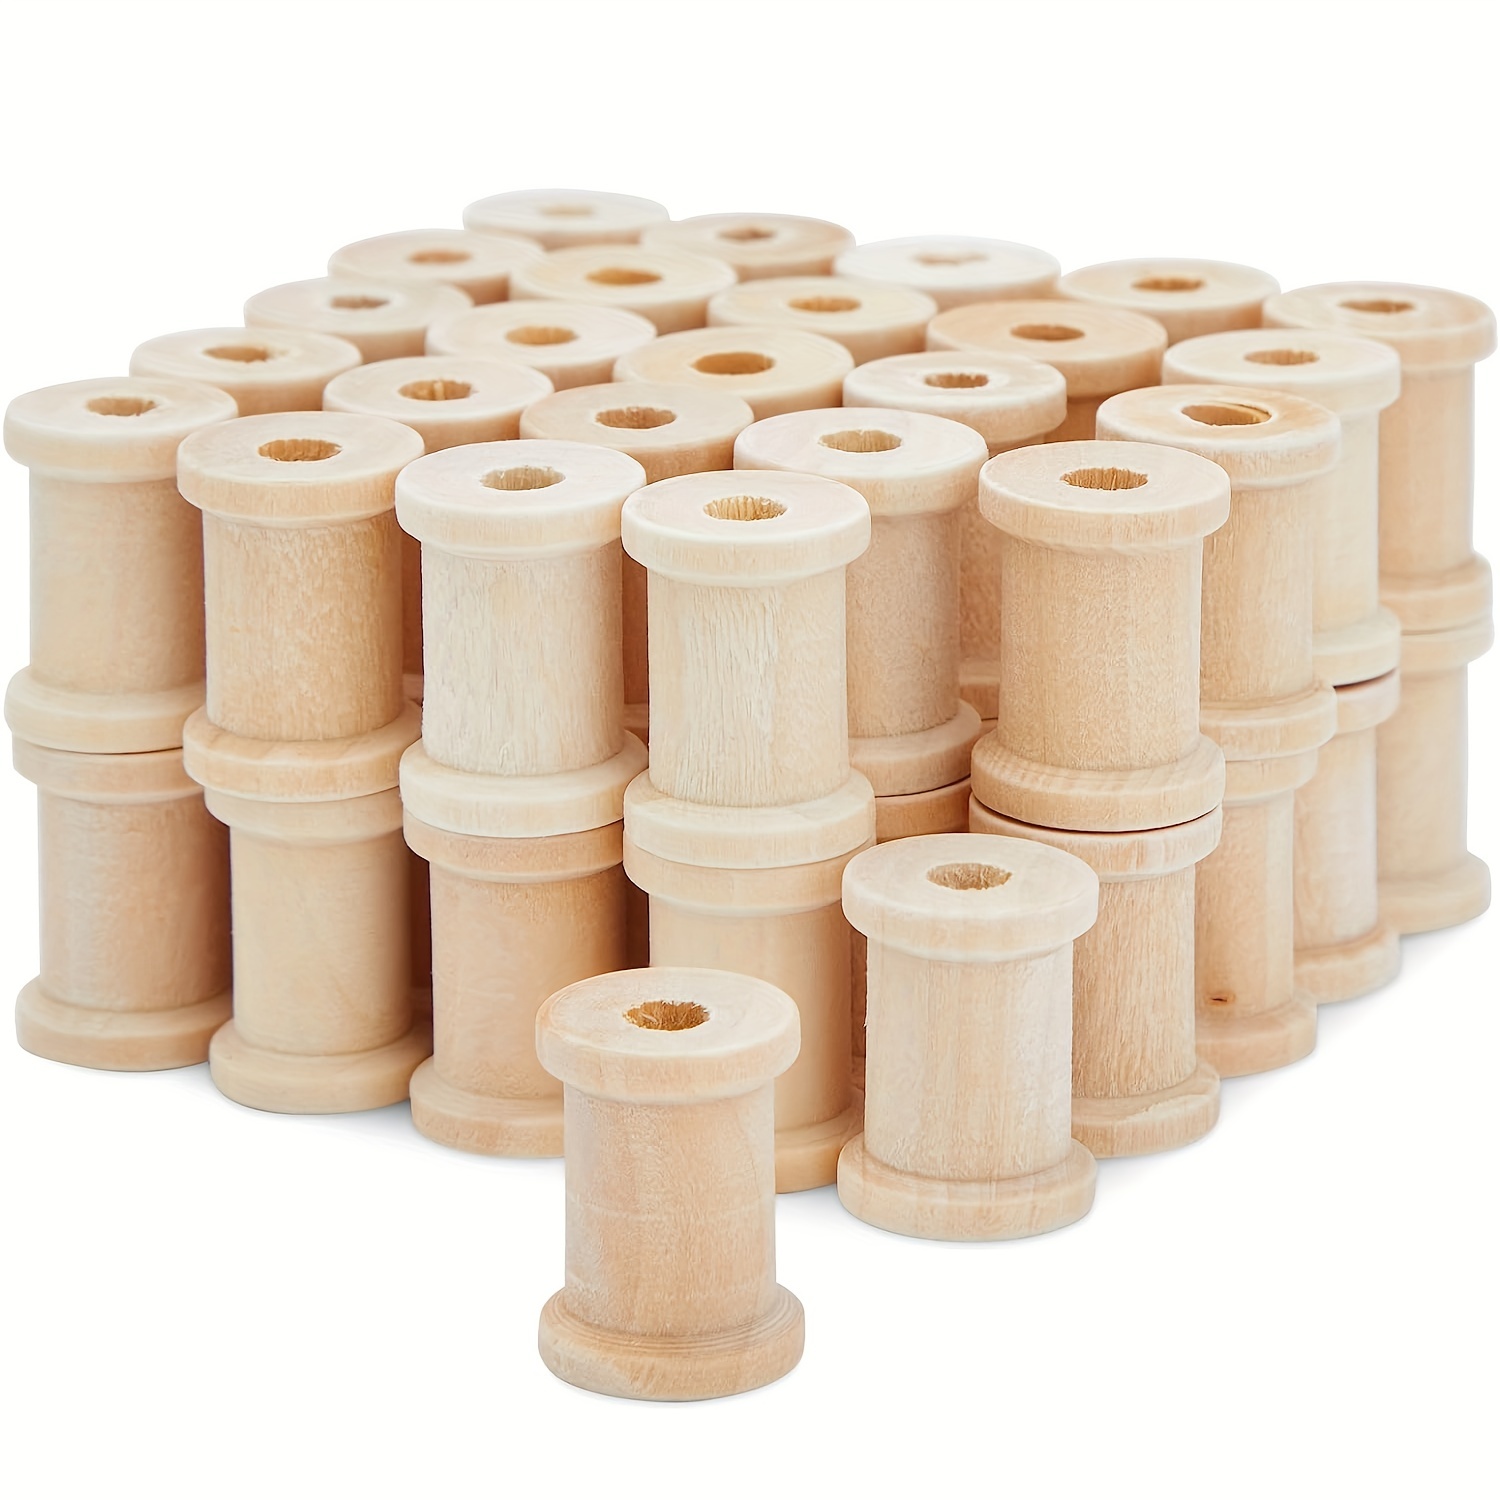 

10pcs Diy Handmade Jewelry Accessories, Wooden Winding Spools, Log Color Retro Scroll Spool Wooden Product Accessories Multiple Size Selection